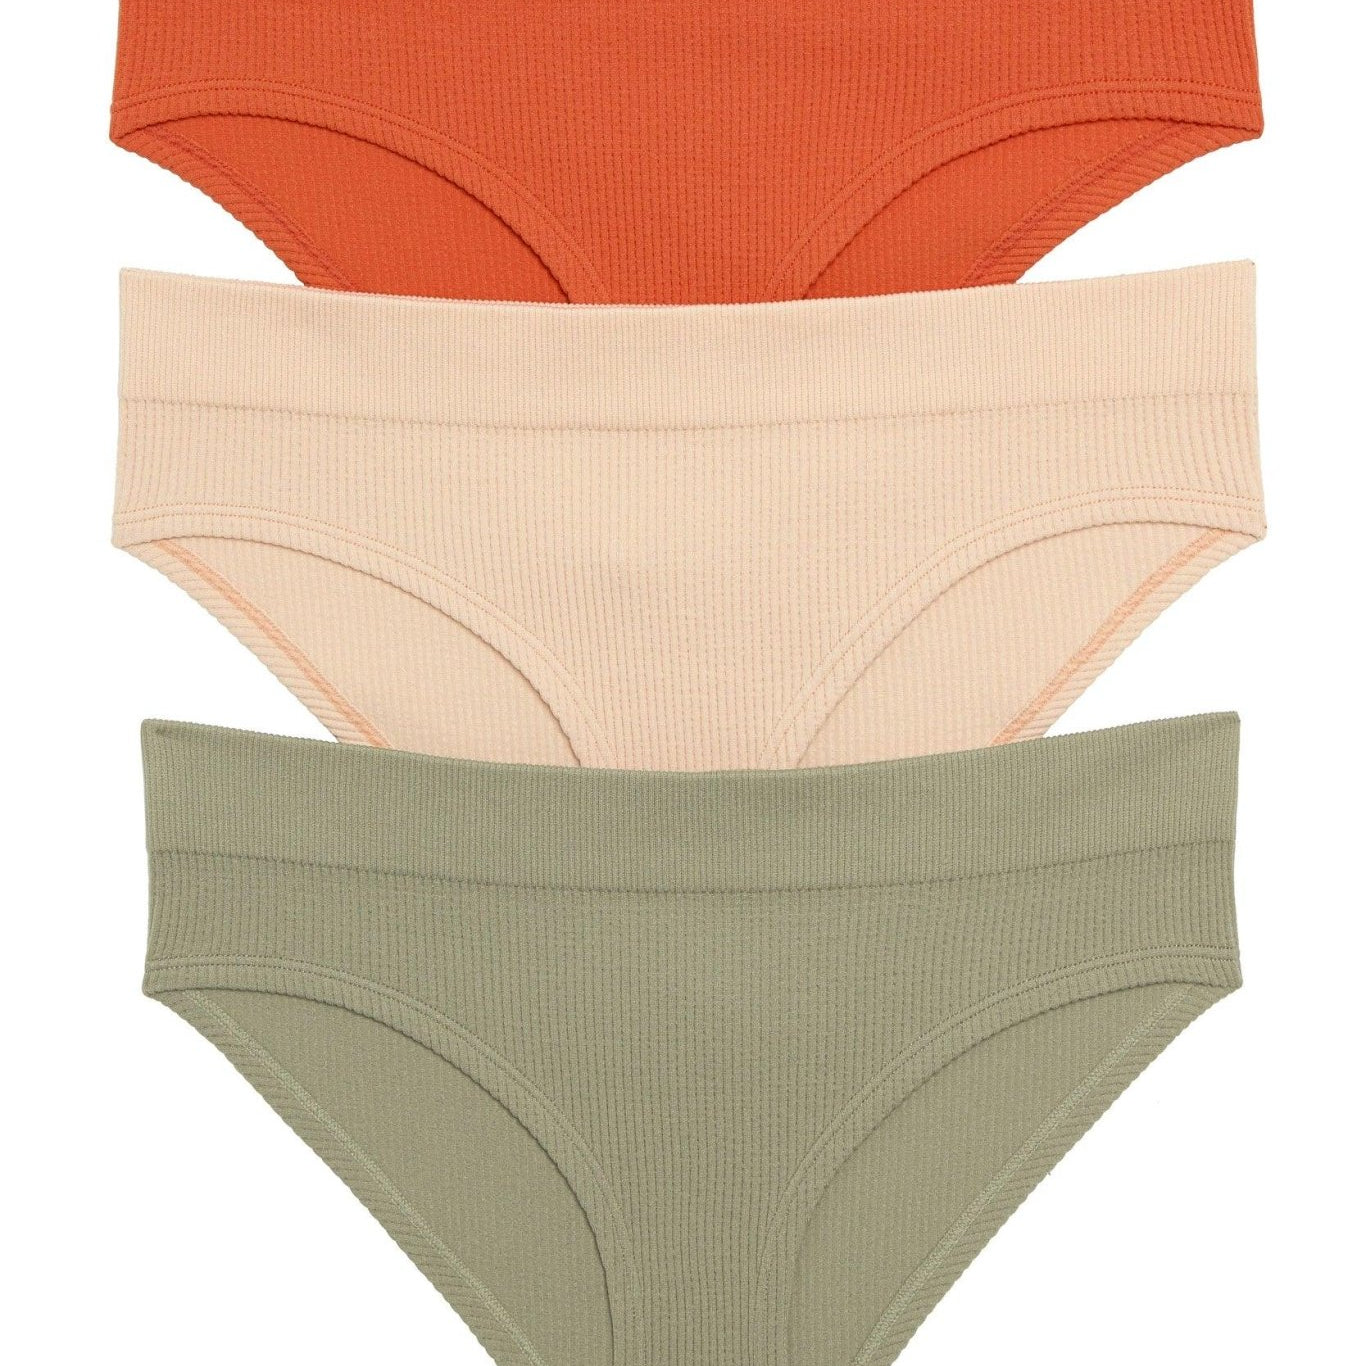 Bailey Hipster 3-Pack - Panty - Terracotta Calm Taurus